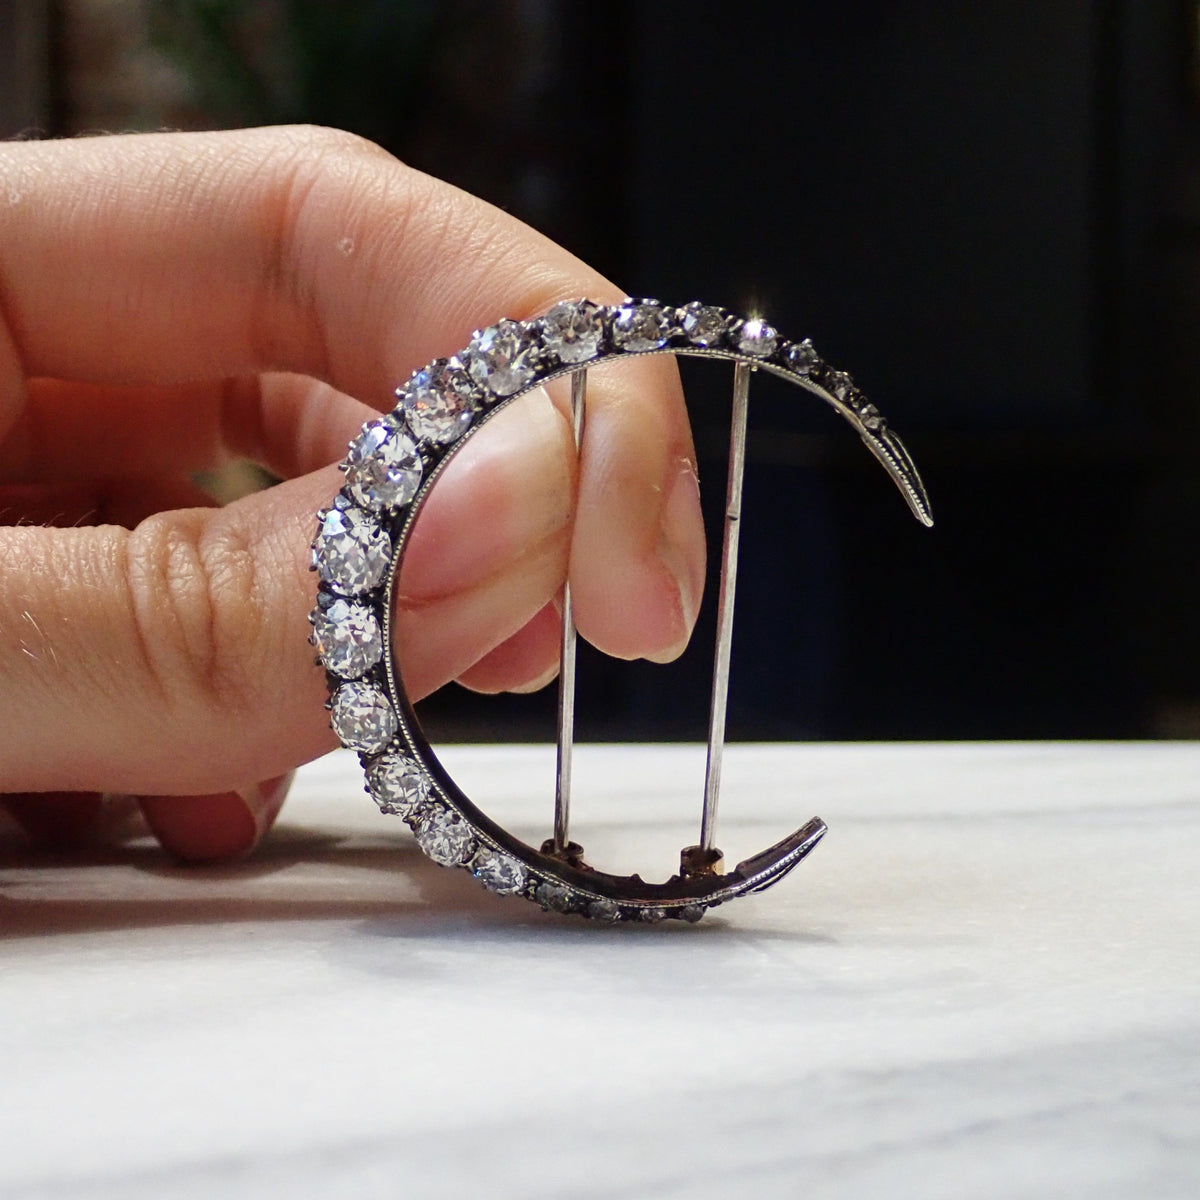 Antique Old European Crescent Brooch sold by Doyle and Doyle an antique and vintage jewelry boutique.